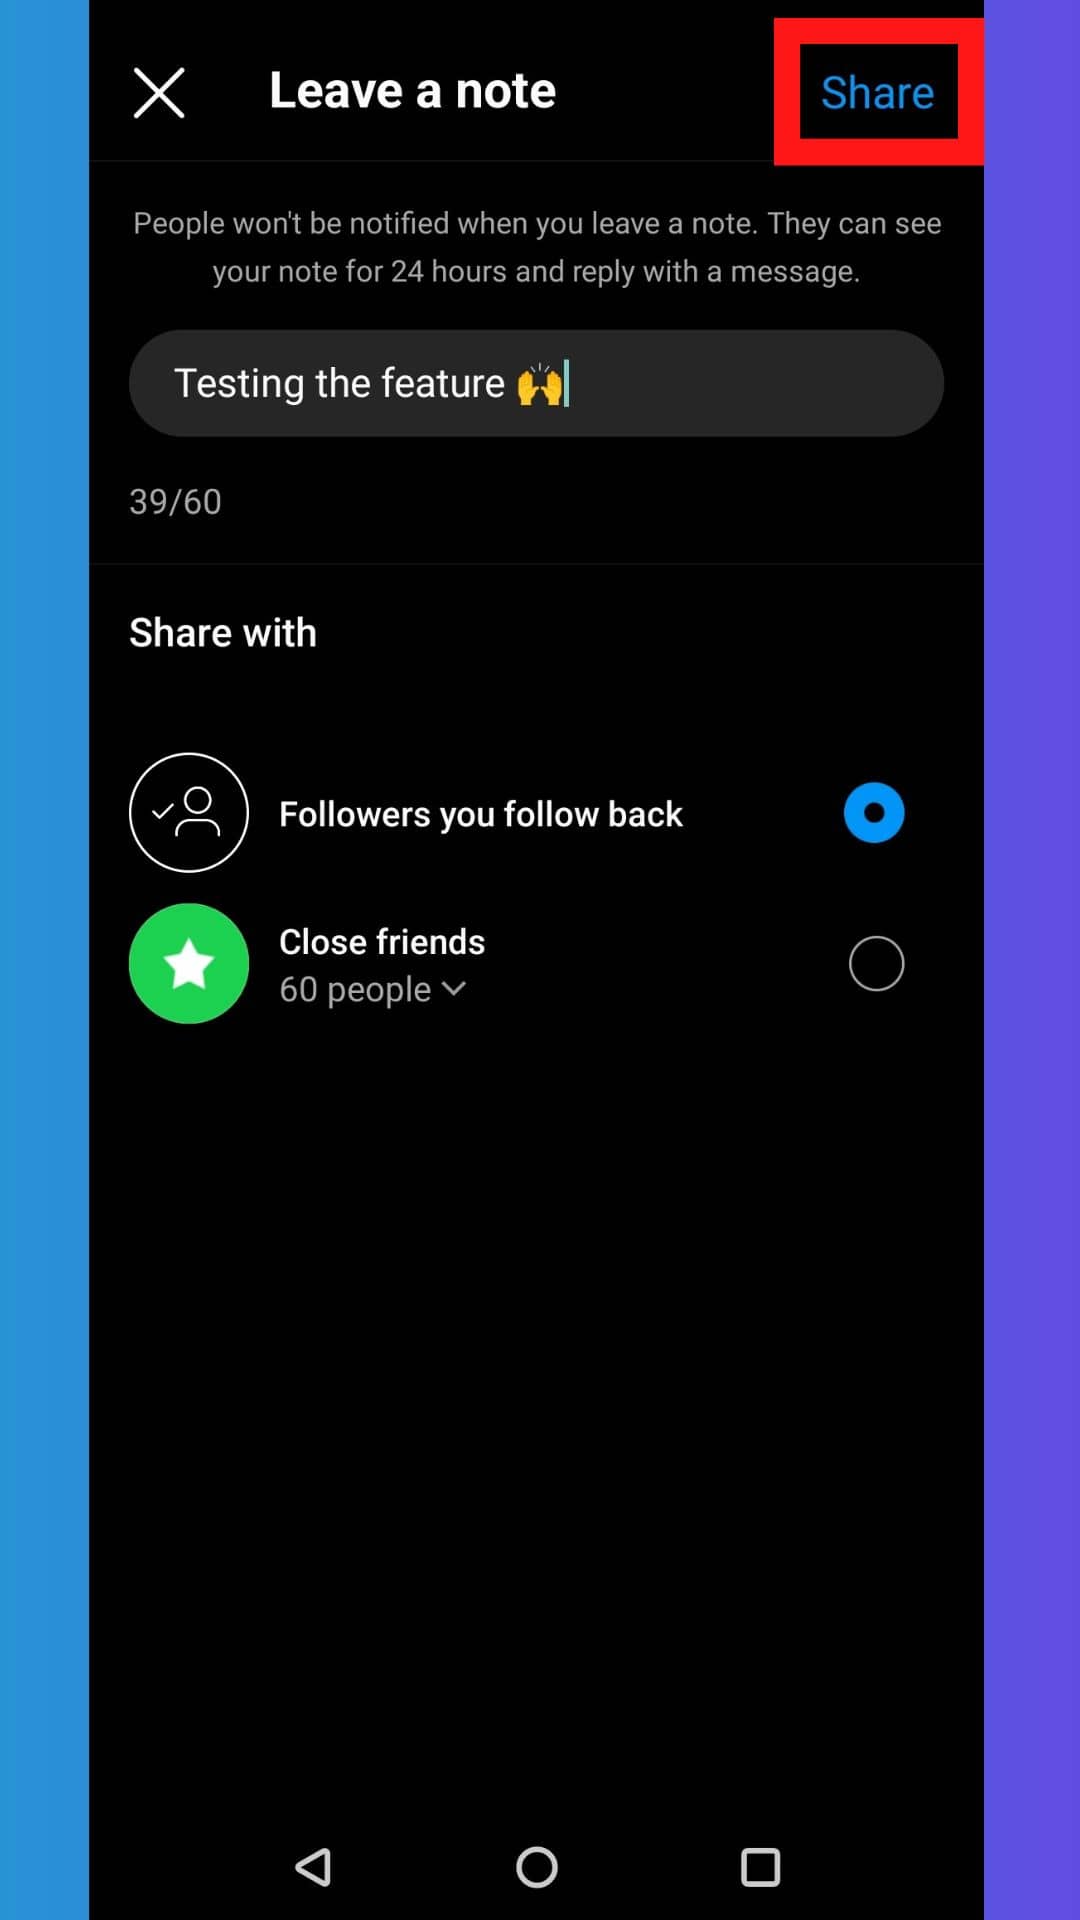 Tap on the Share option